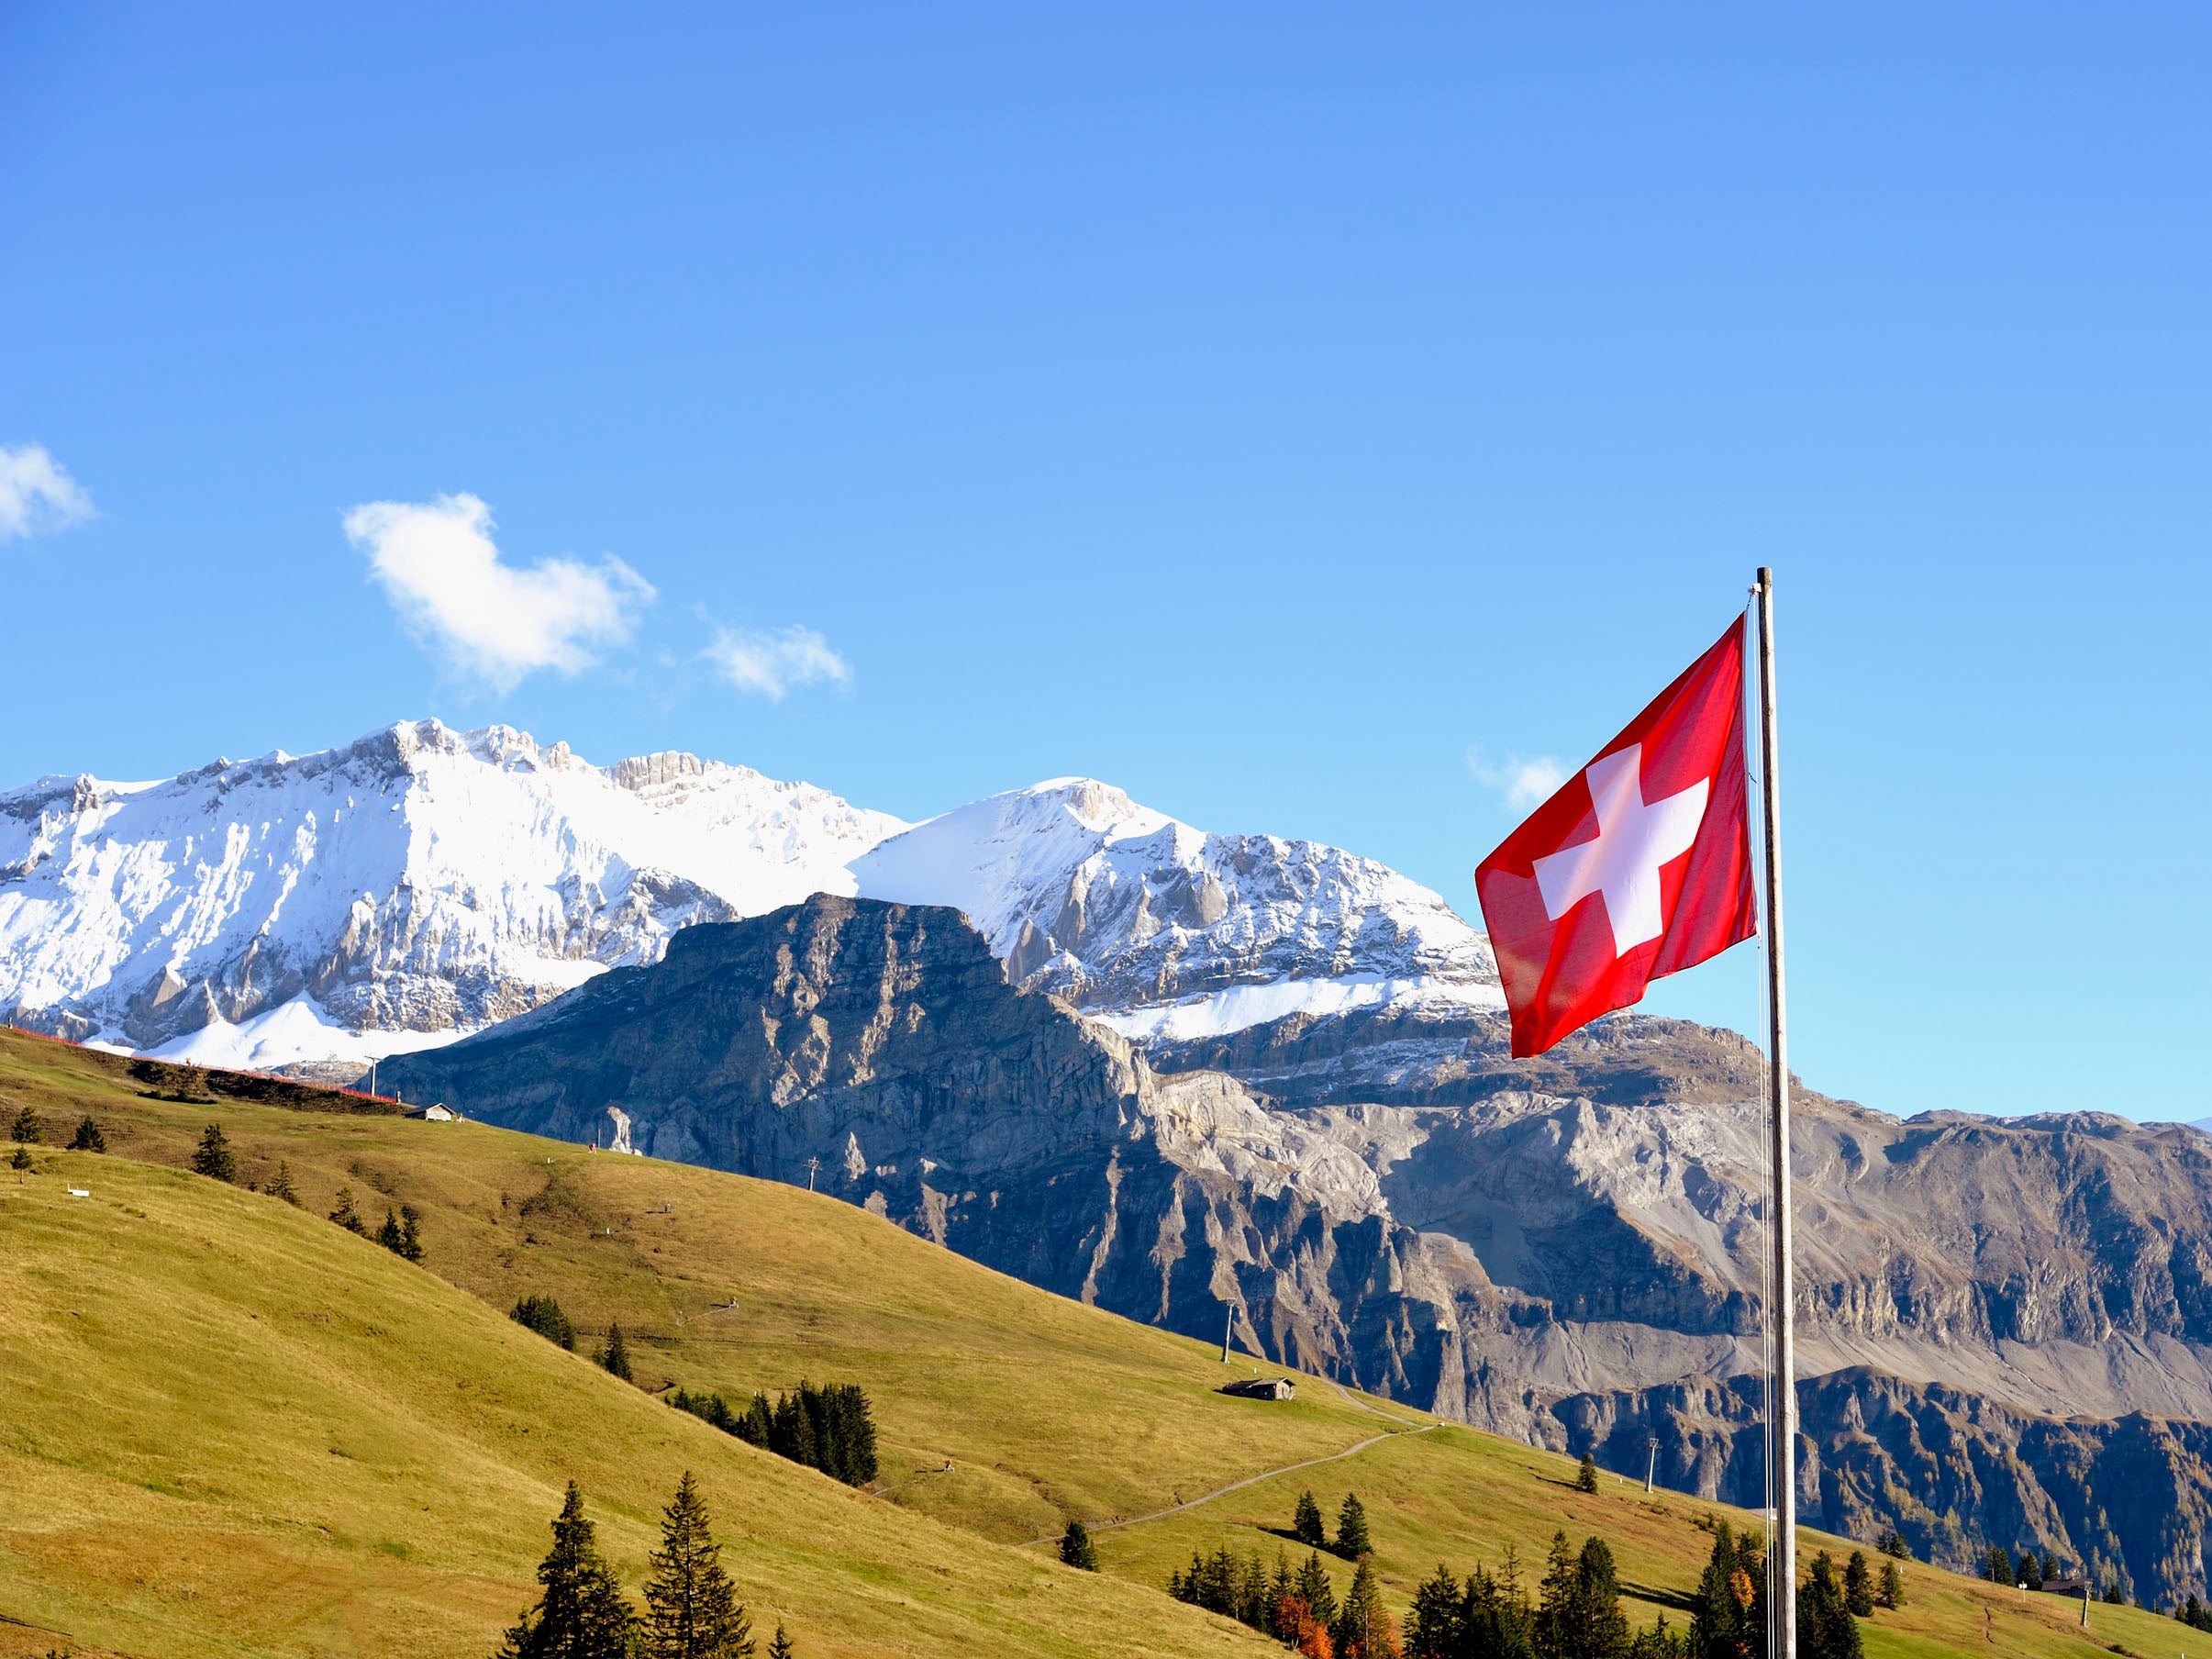 Switzerland is a member of the European Free Trade Association but not the EU